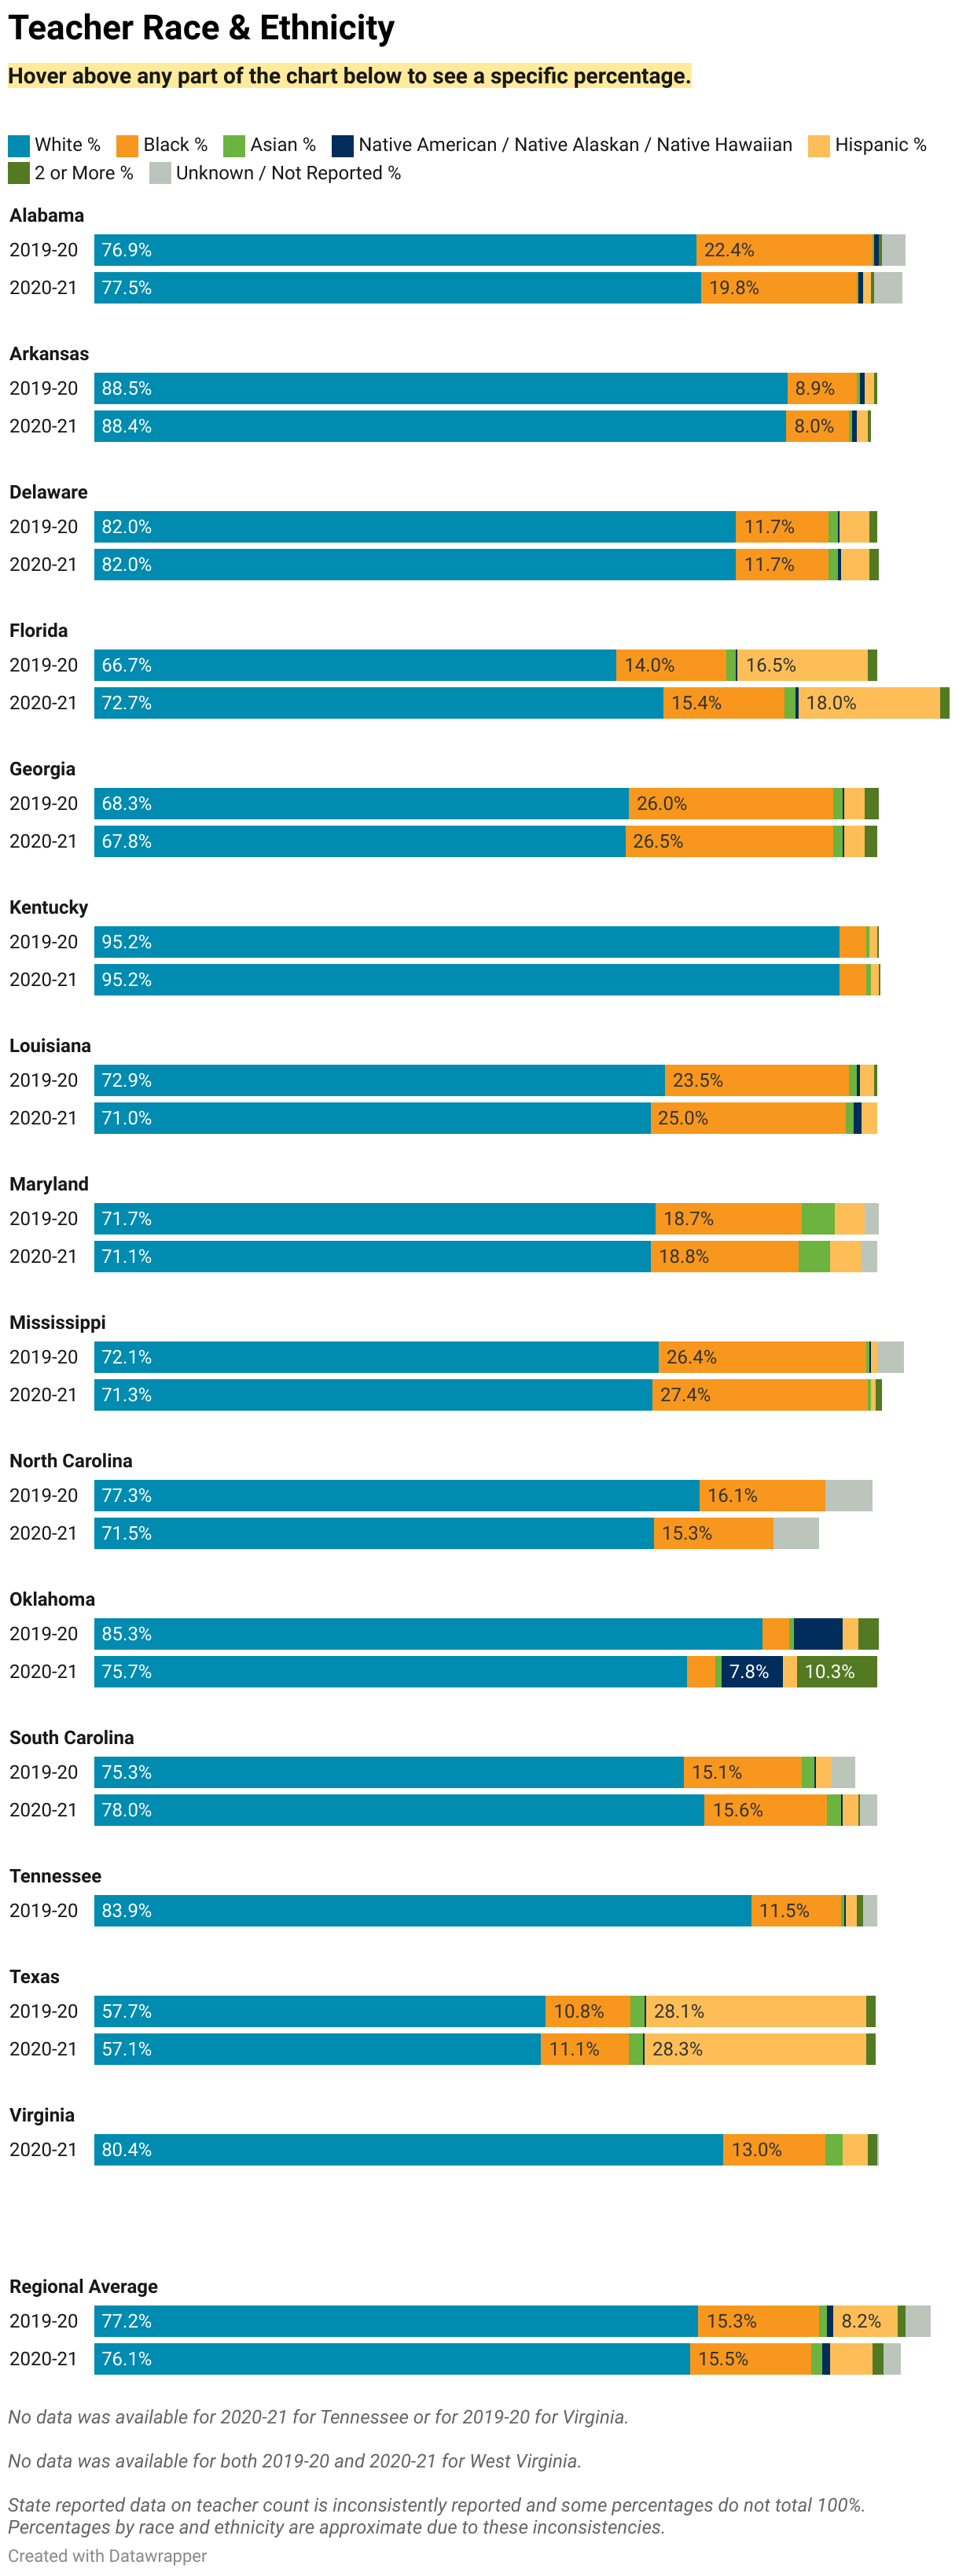 Sets of bar graphs for each state in the SREB region showing teacher demographics by race/ethnicity for 2019-20 and 2020-21. 